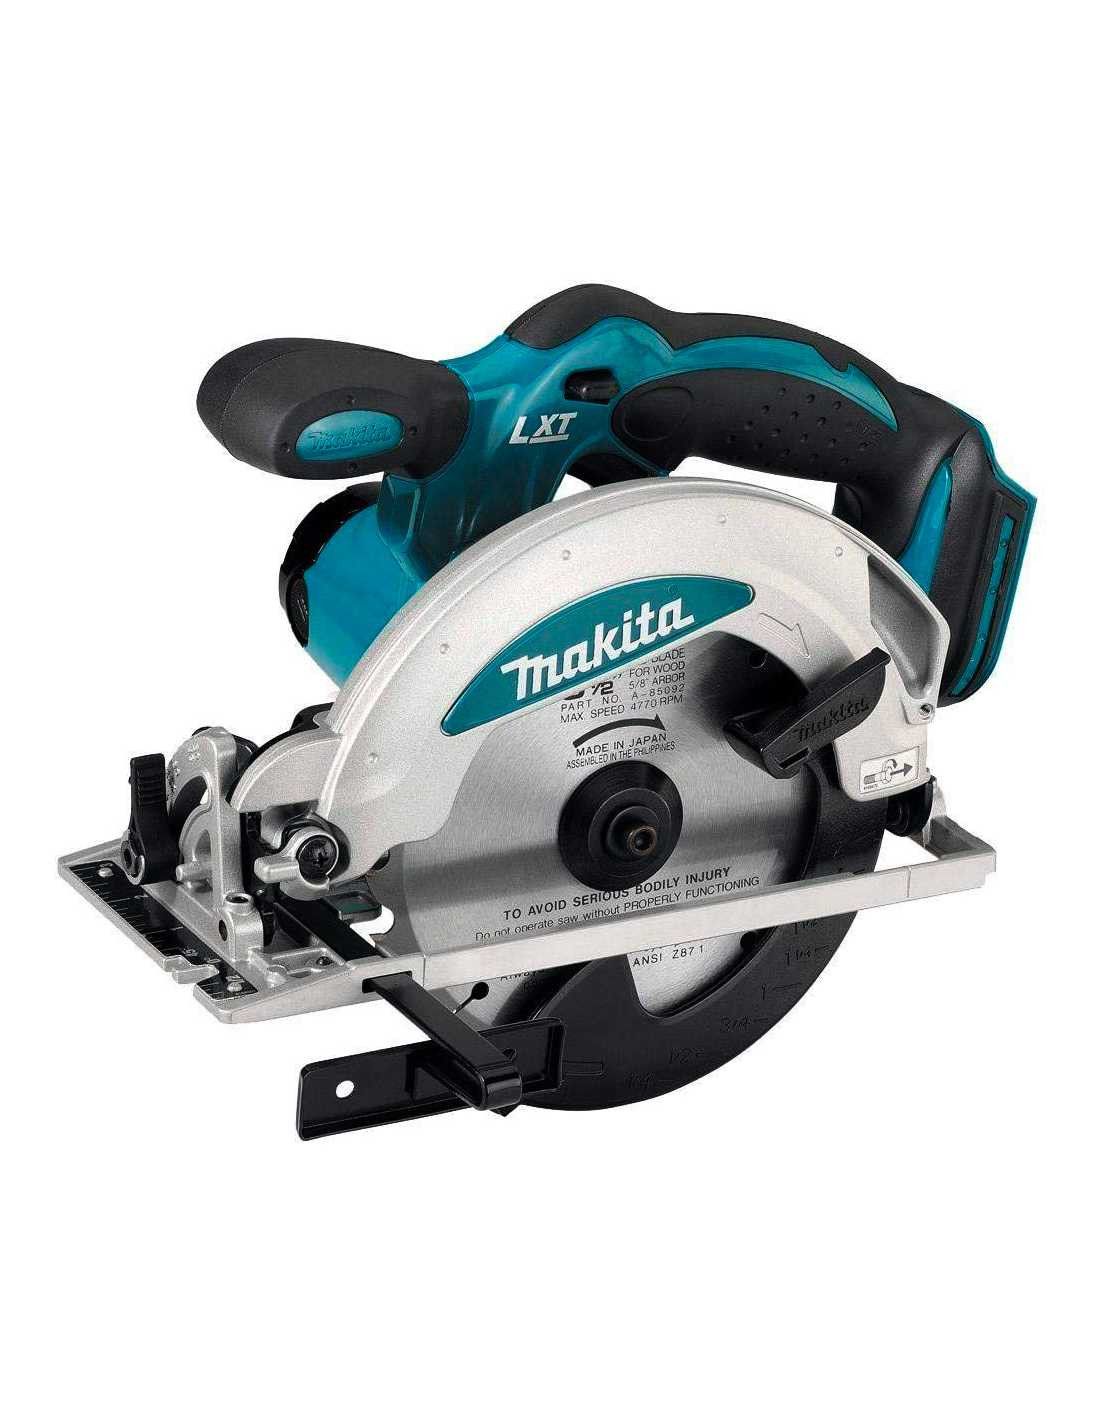 Makita kit with 11 tools + 3 bat + charger + 2 bags DLX1171BL3